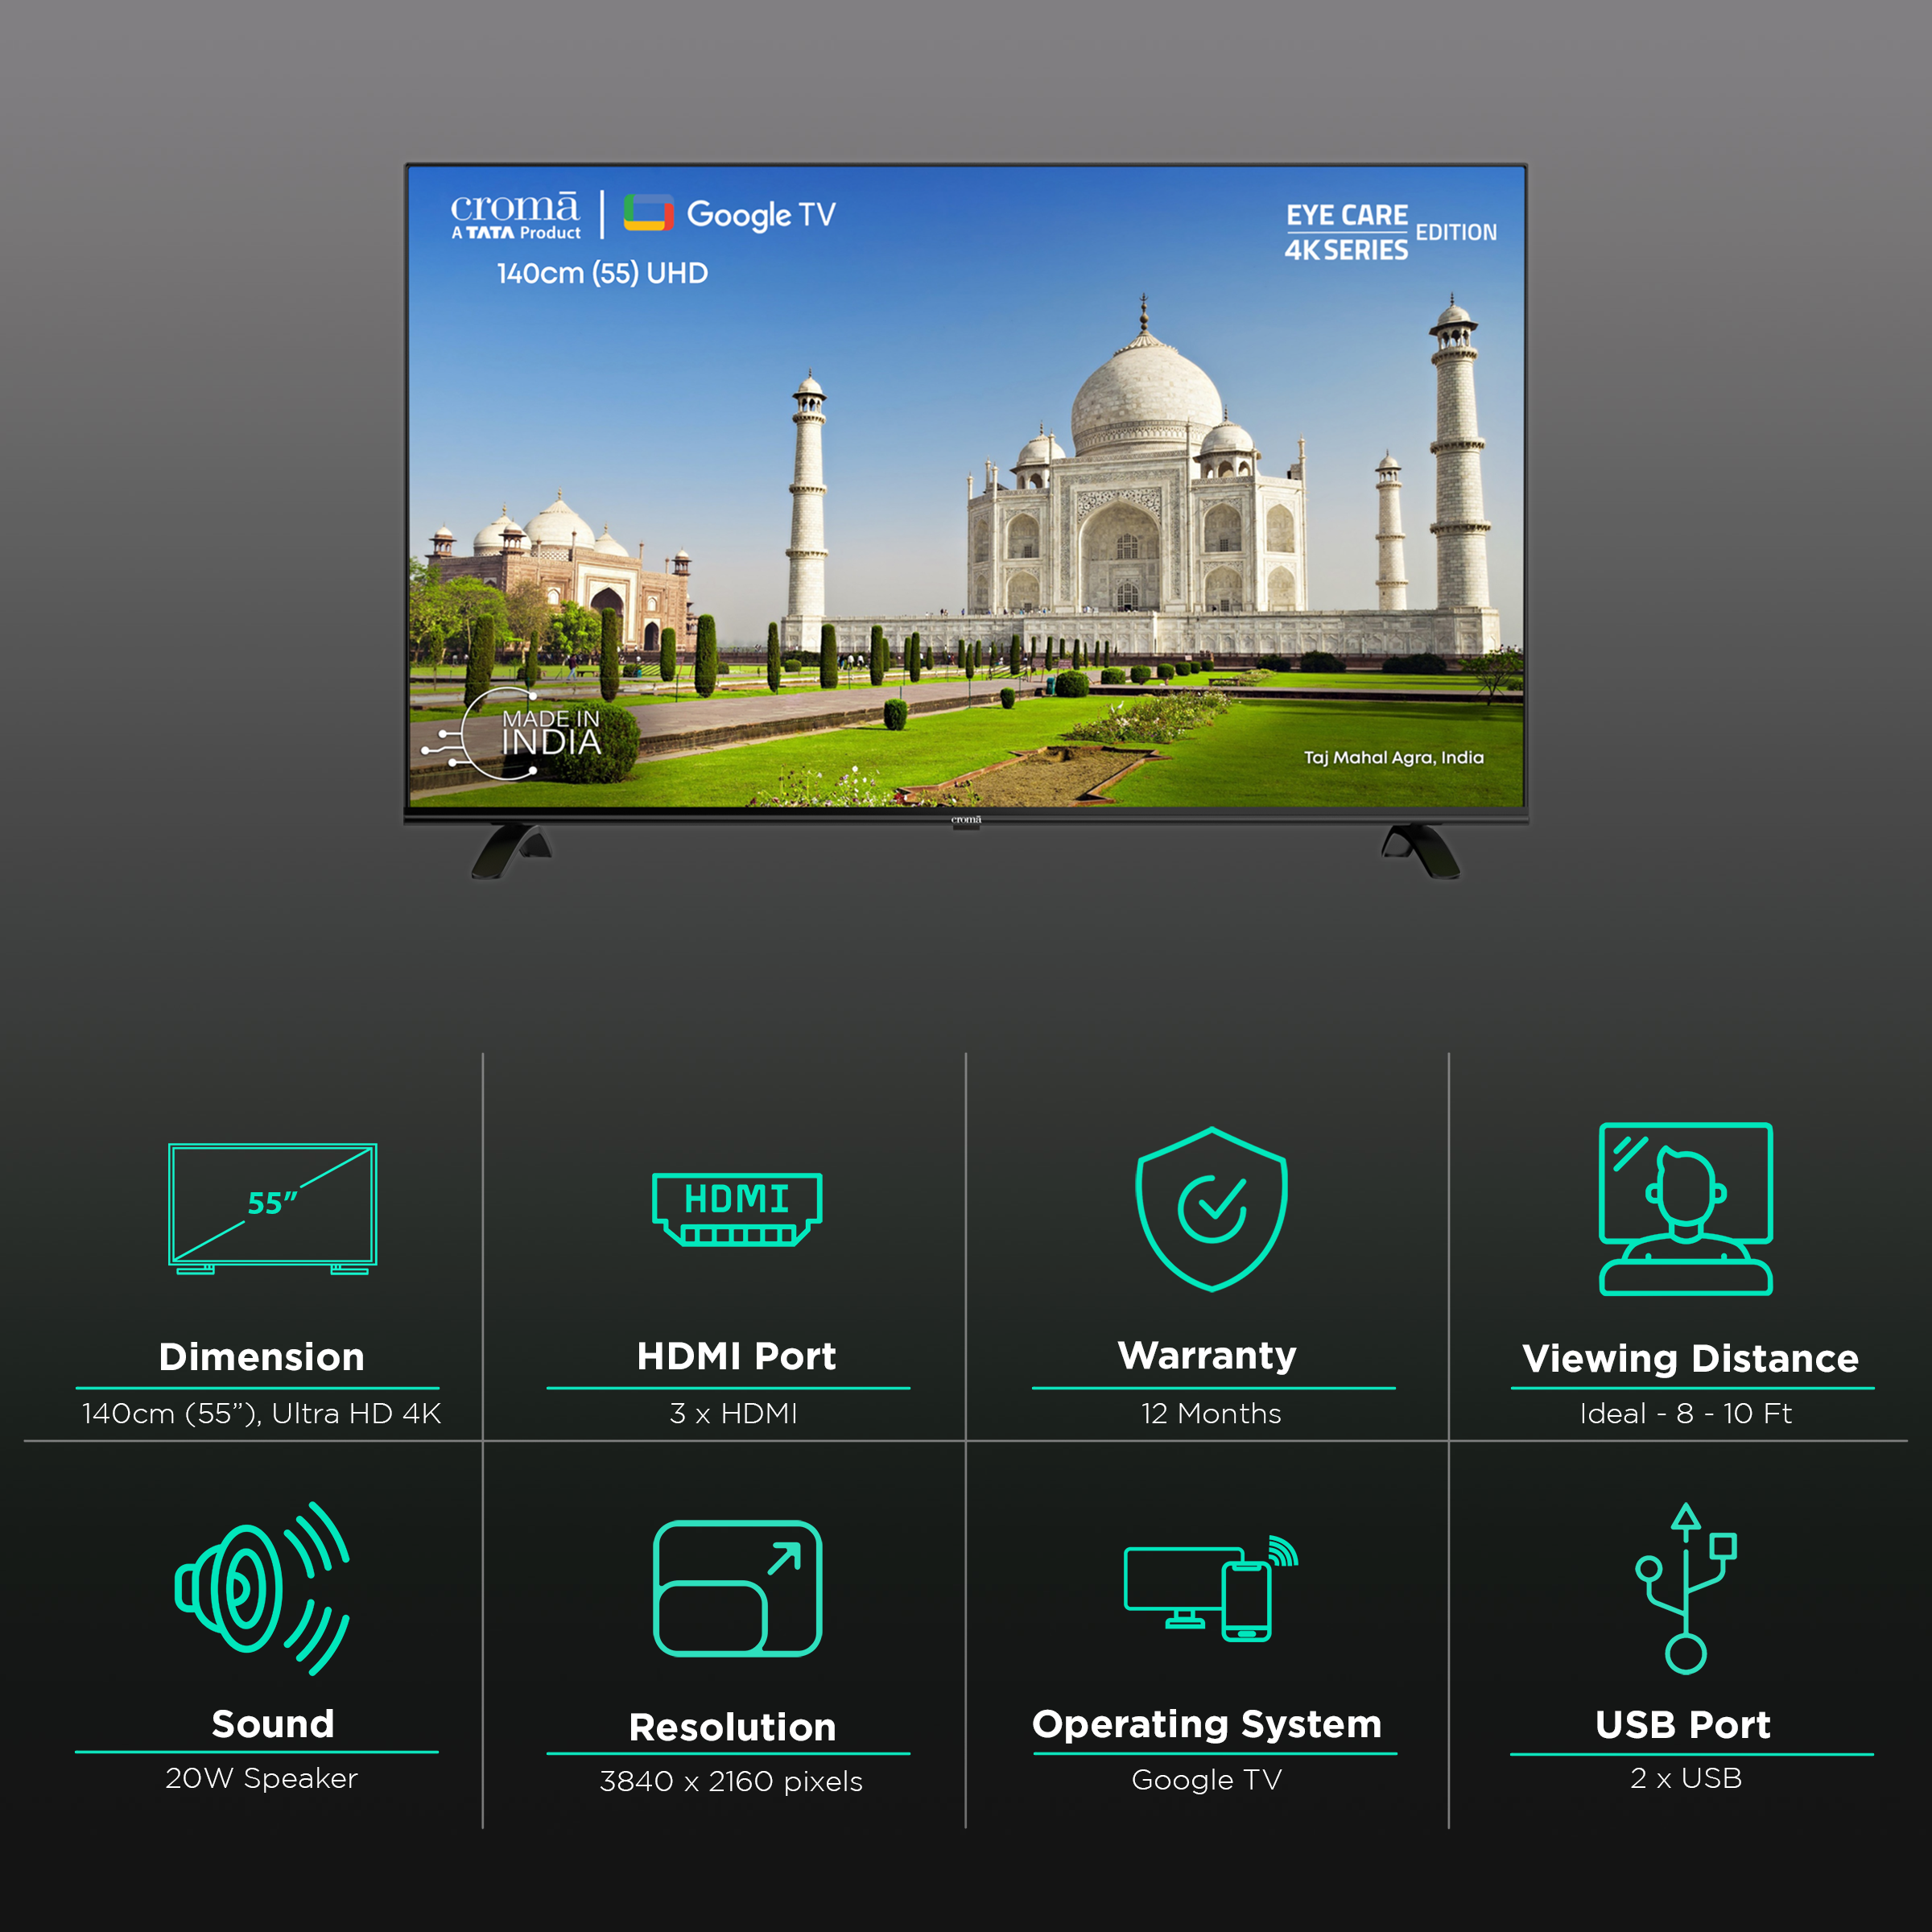 1920x1080 Pixel 40 Inch Crown Smart LED TV at Rs 10500/unit in Indore